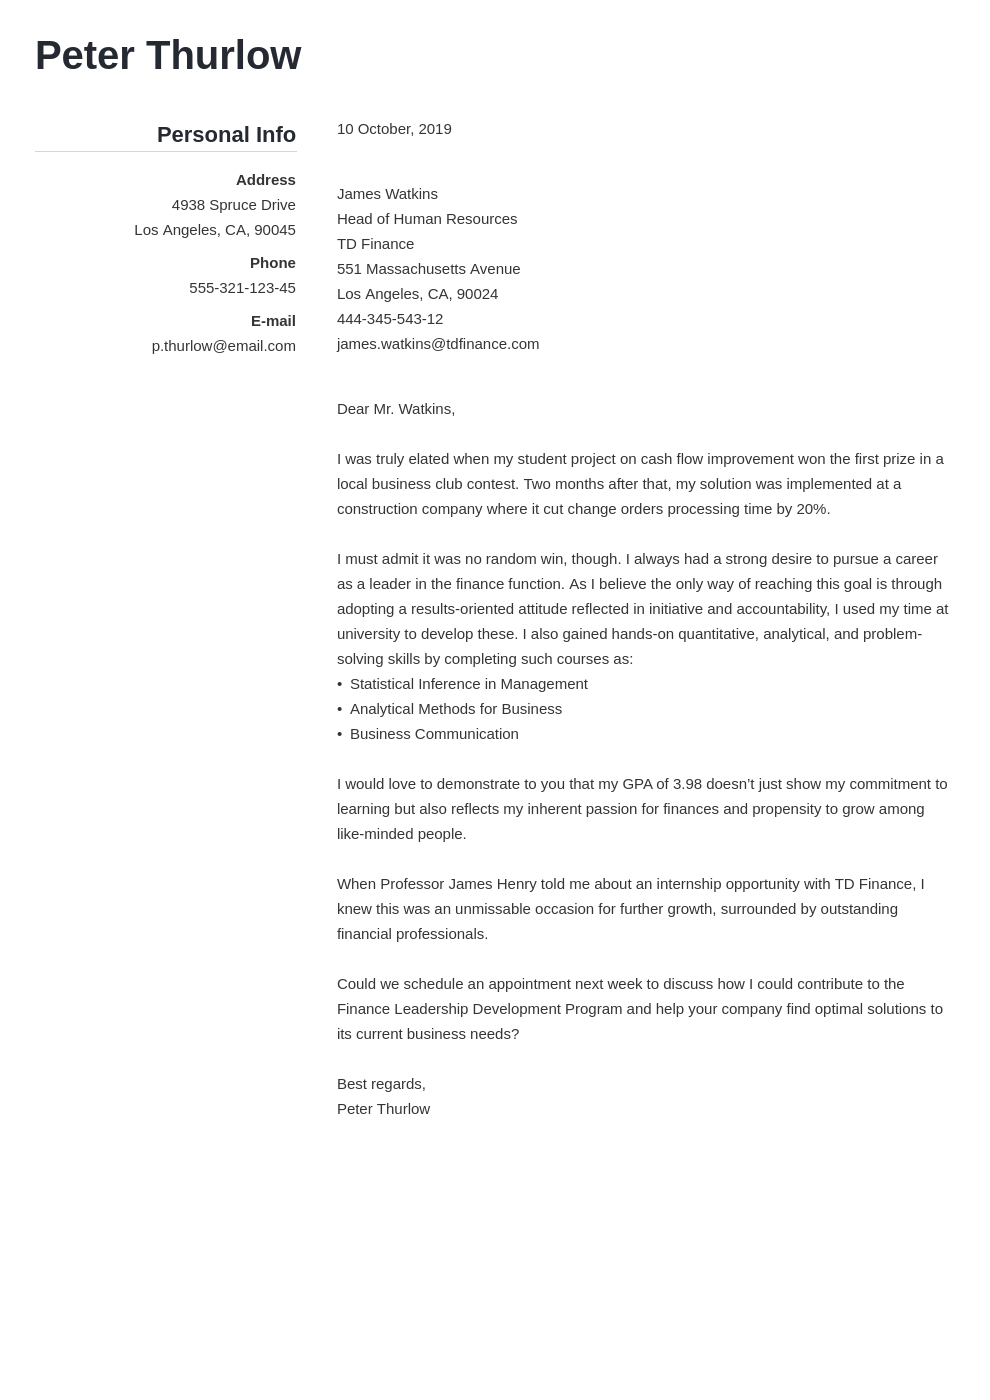 Cover Letter for an Internship: Example & Writing Guide